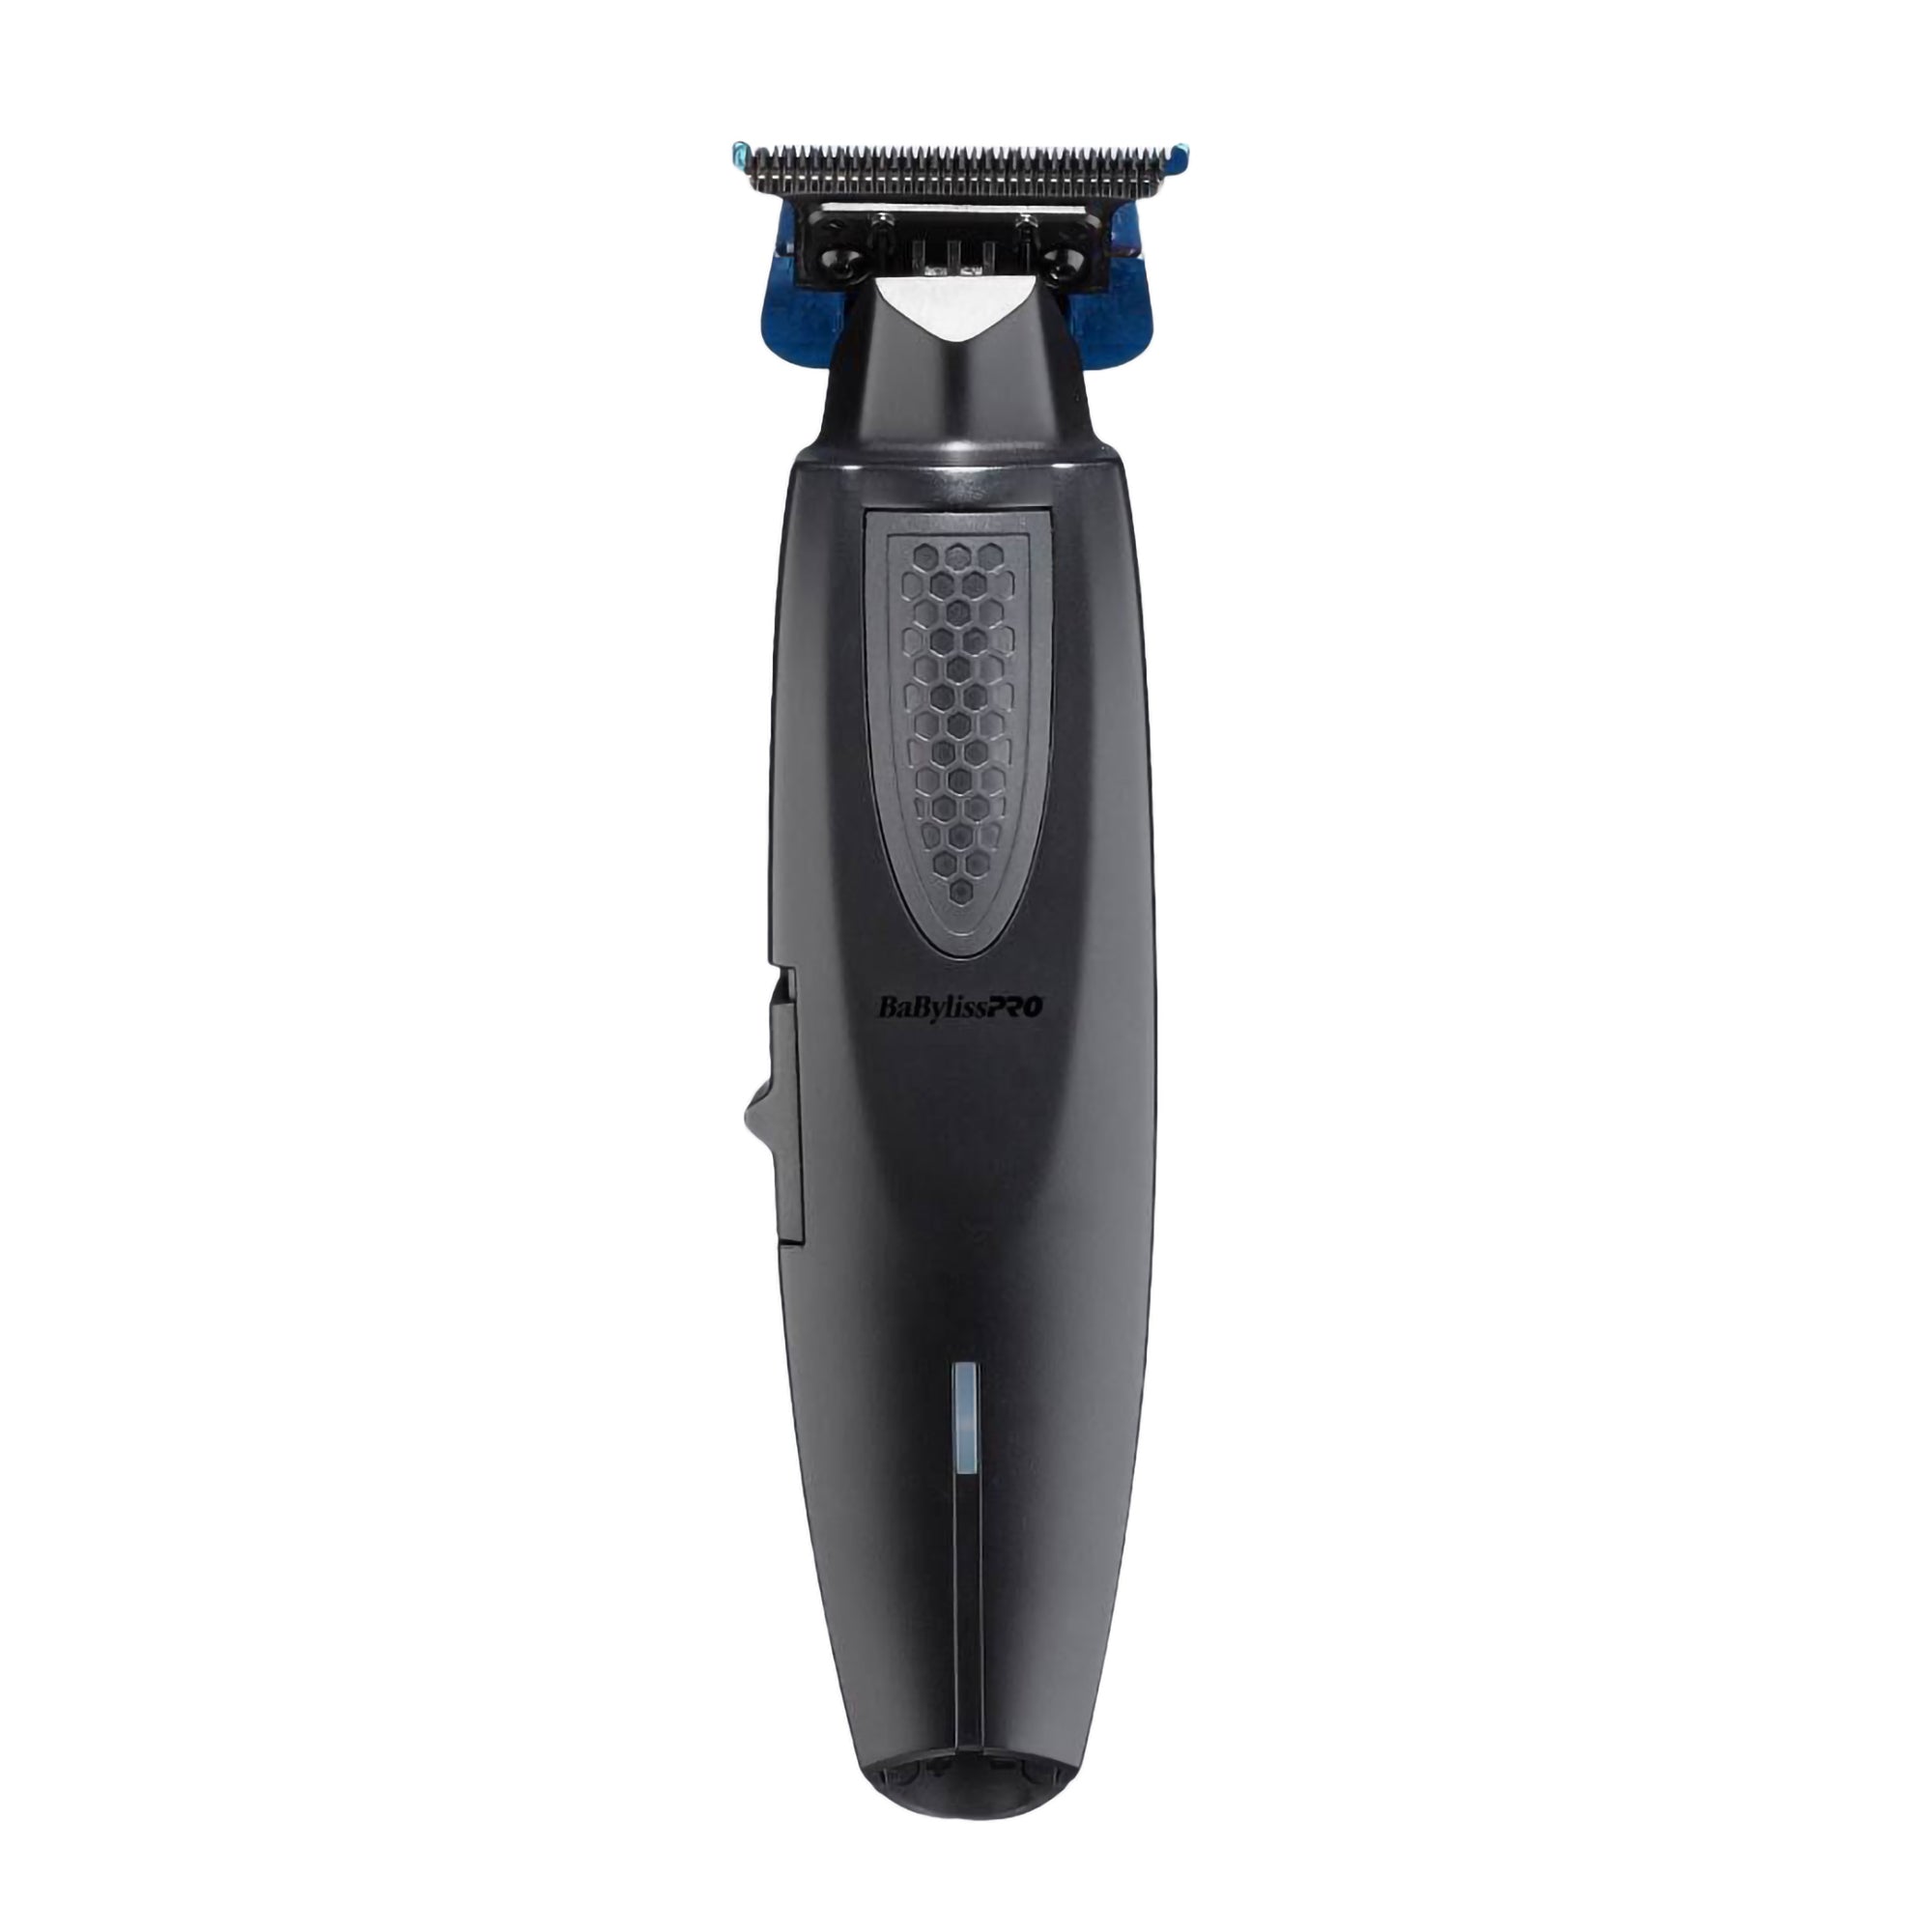 Babylisspro LithiumFX Limited Edition Cord/Cordless Lithium Ergonomic Trimmer - Item No. FX773NMB